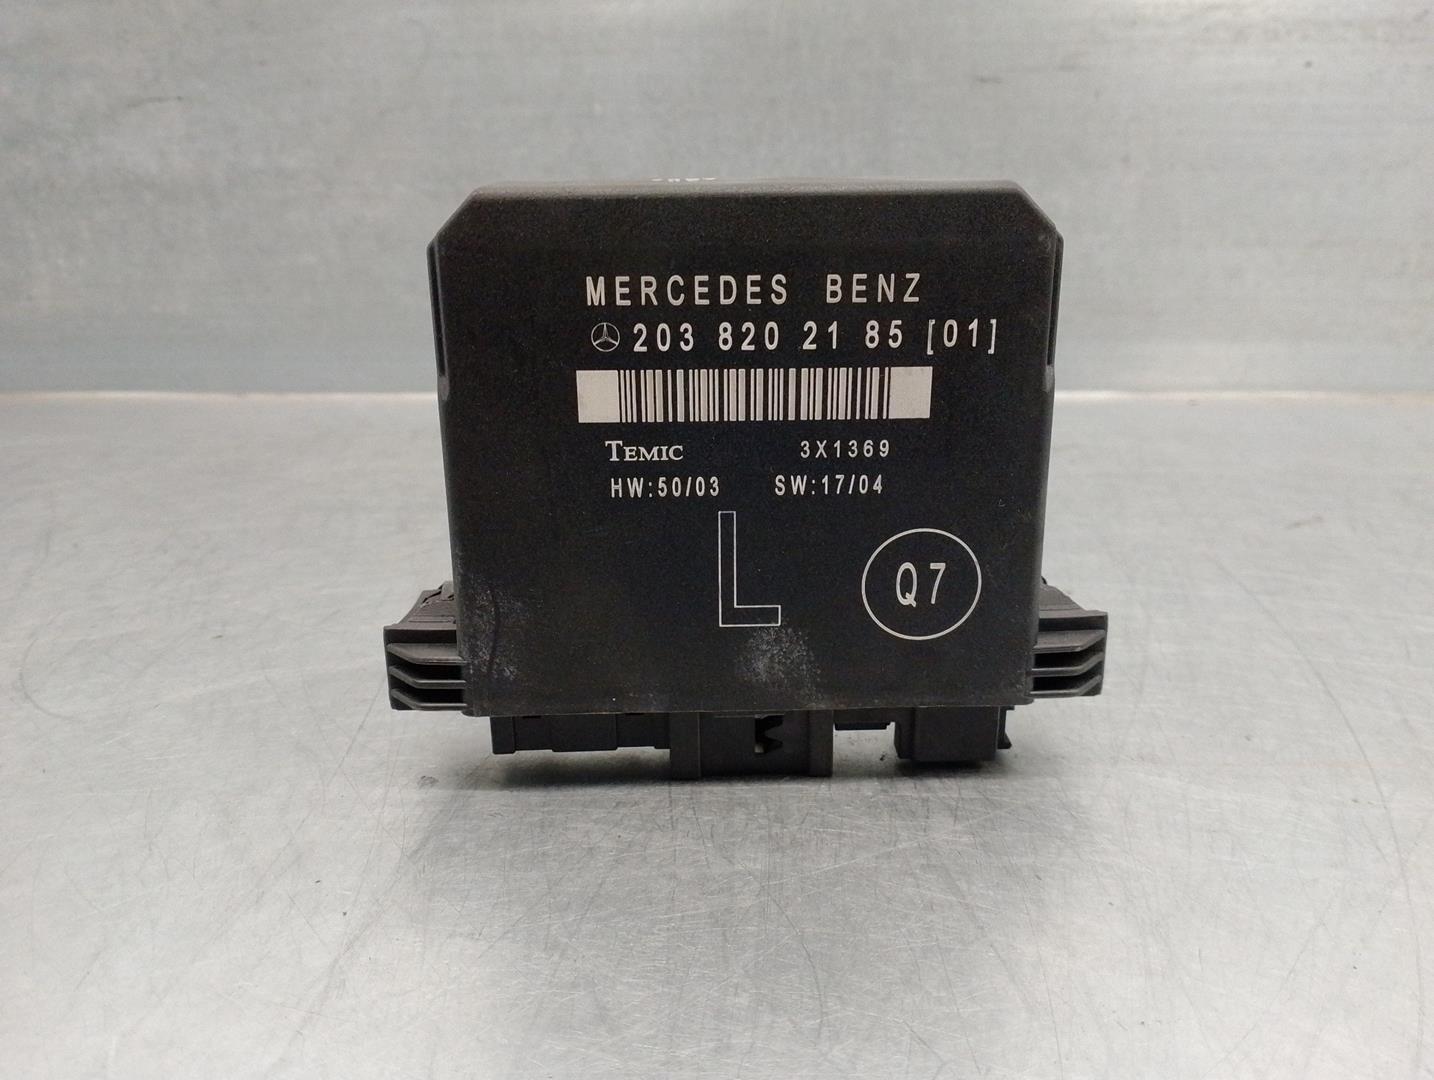 MERCEDES-BENZ C-Class W203/S203/CL203 (2000-2008) Other Control Units 2038202185, 3X1369, TEMIC 19916568